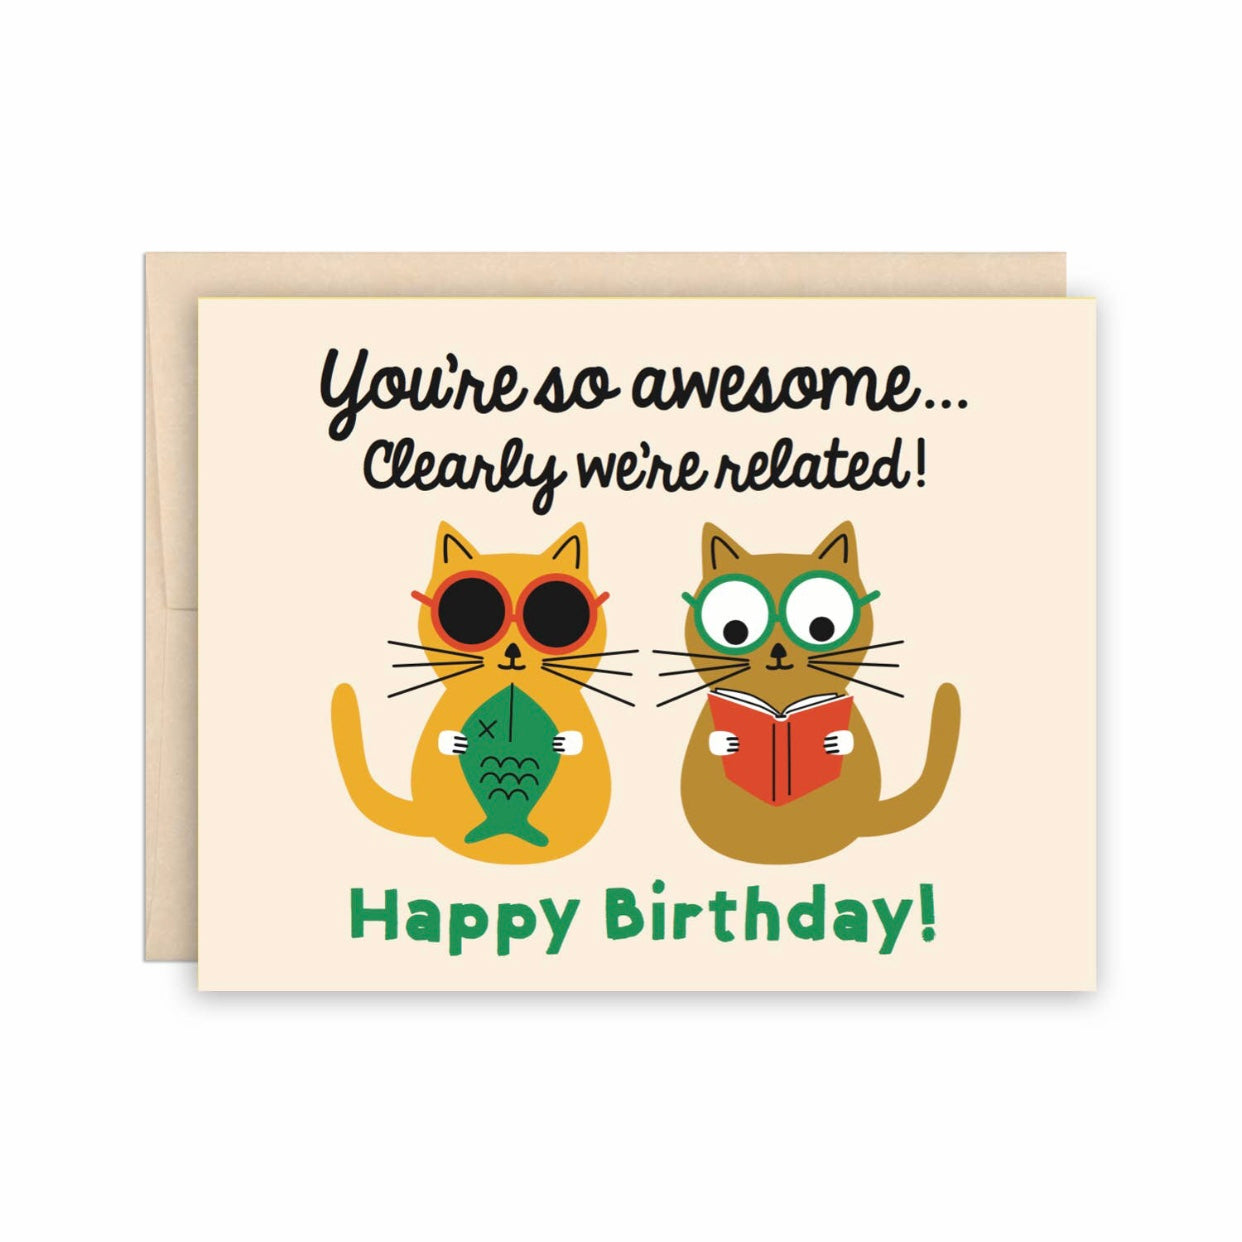 You're so awesome Happy Birthday Greeting Card